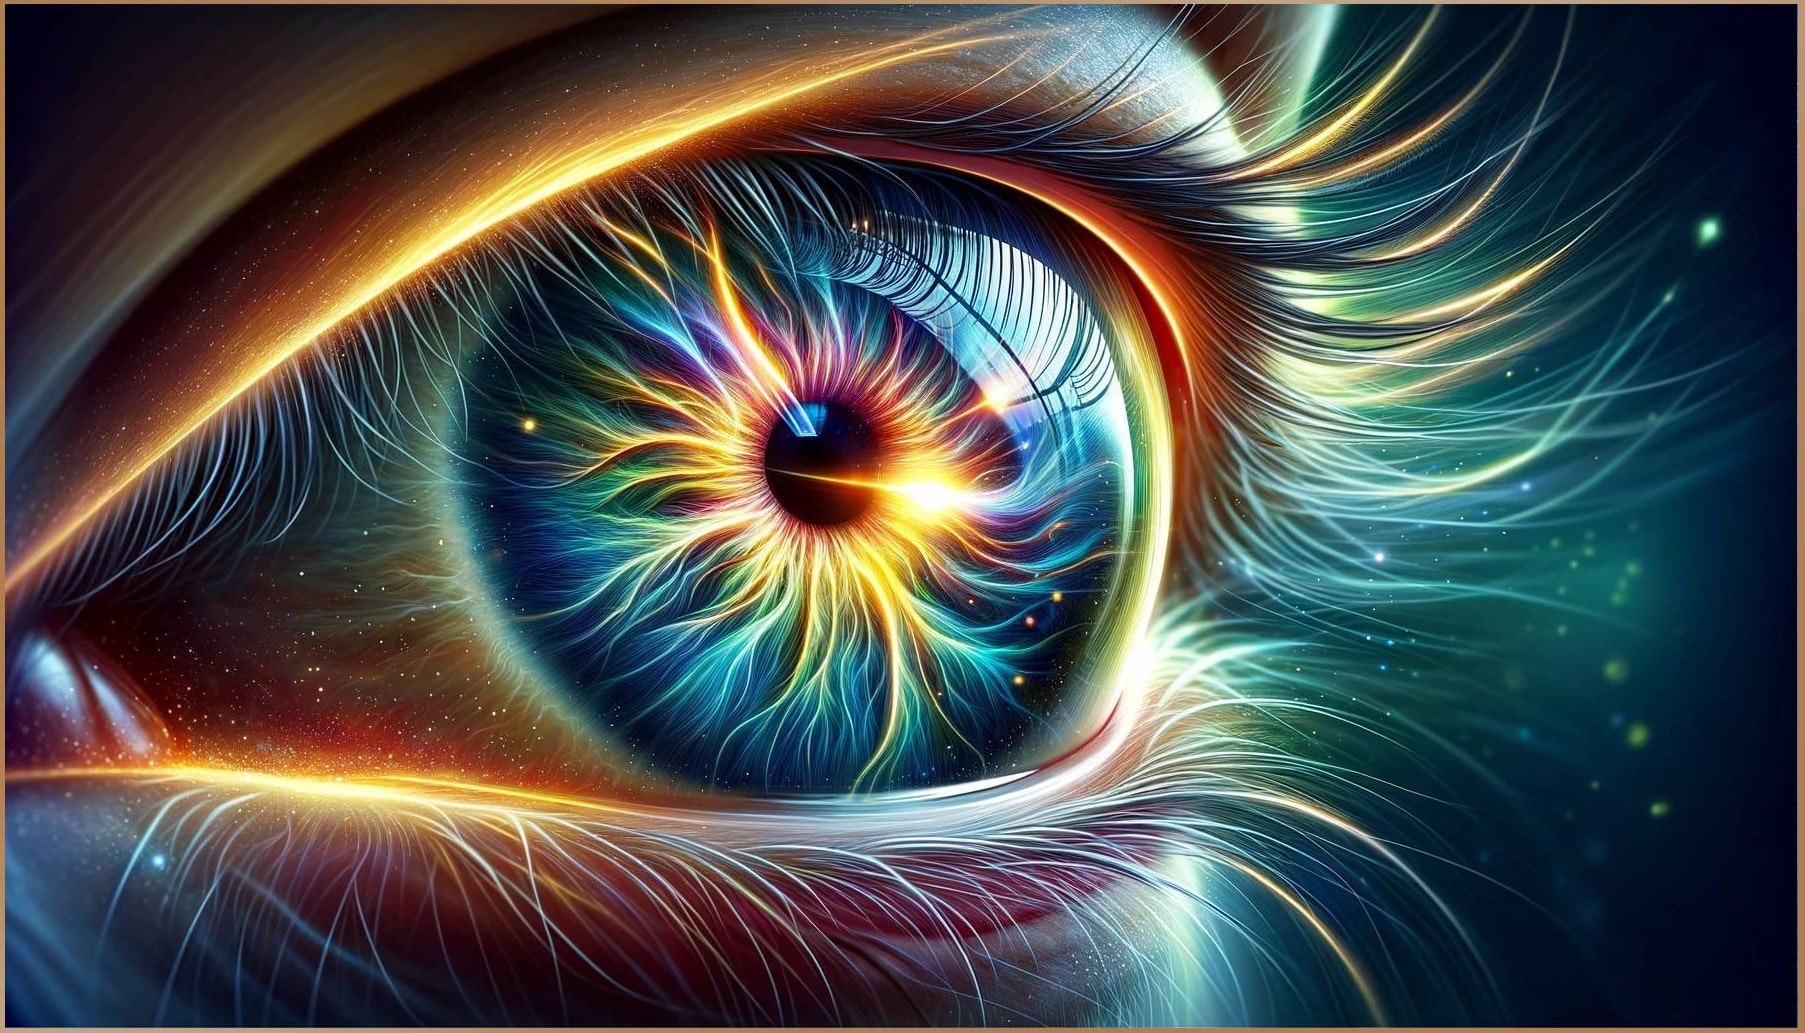 A vividly detailed eye with cosmic elements, symbolizing the concept of remote viewing as a portal to expanded consciousness and perception beyond the visible.